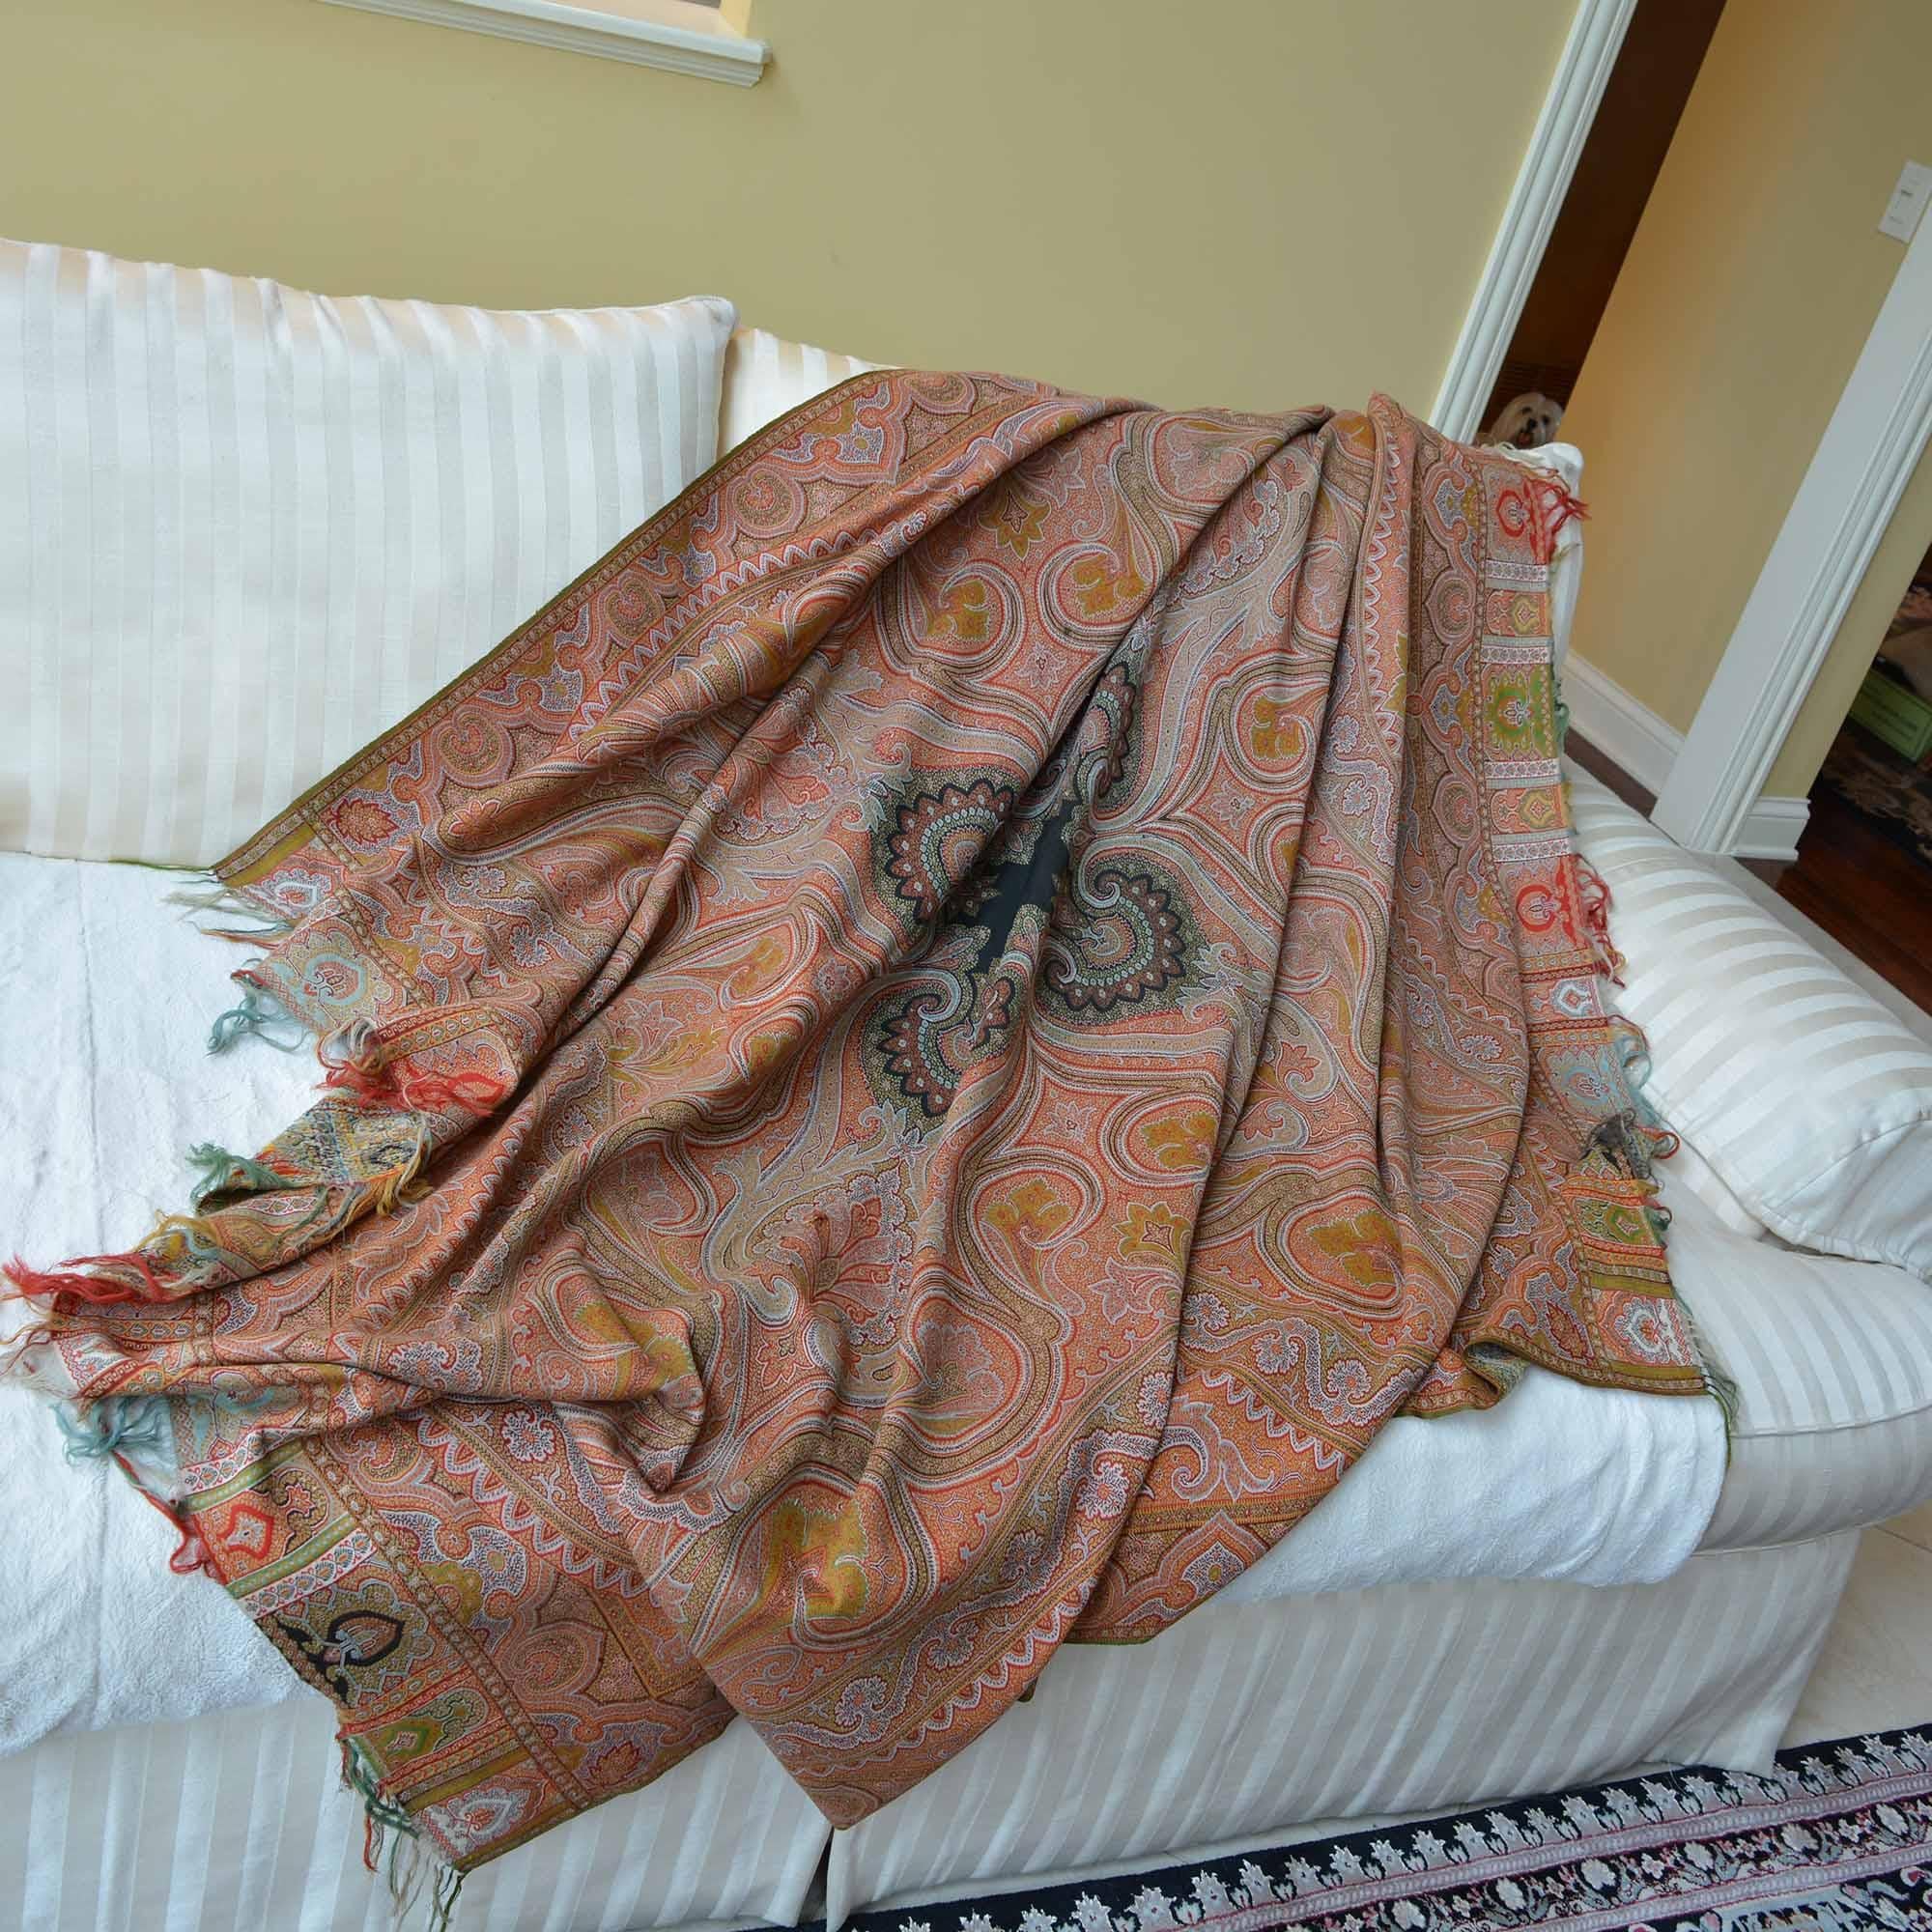 Earth tone, very large silk cashmere paisley throw shawl. We found this beautiful piece in a boutique just outside of Paris that specializes in wonderful finds from estate sales. It is believed to be from the mid to late 1800’s and hand woven. It is